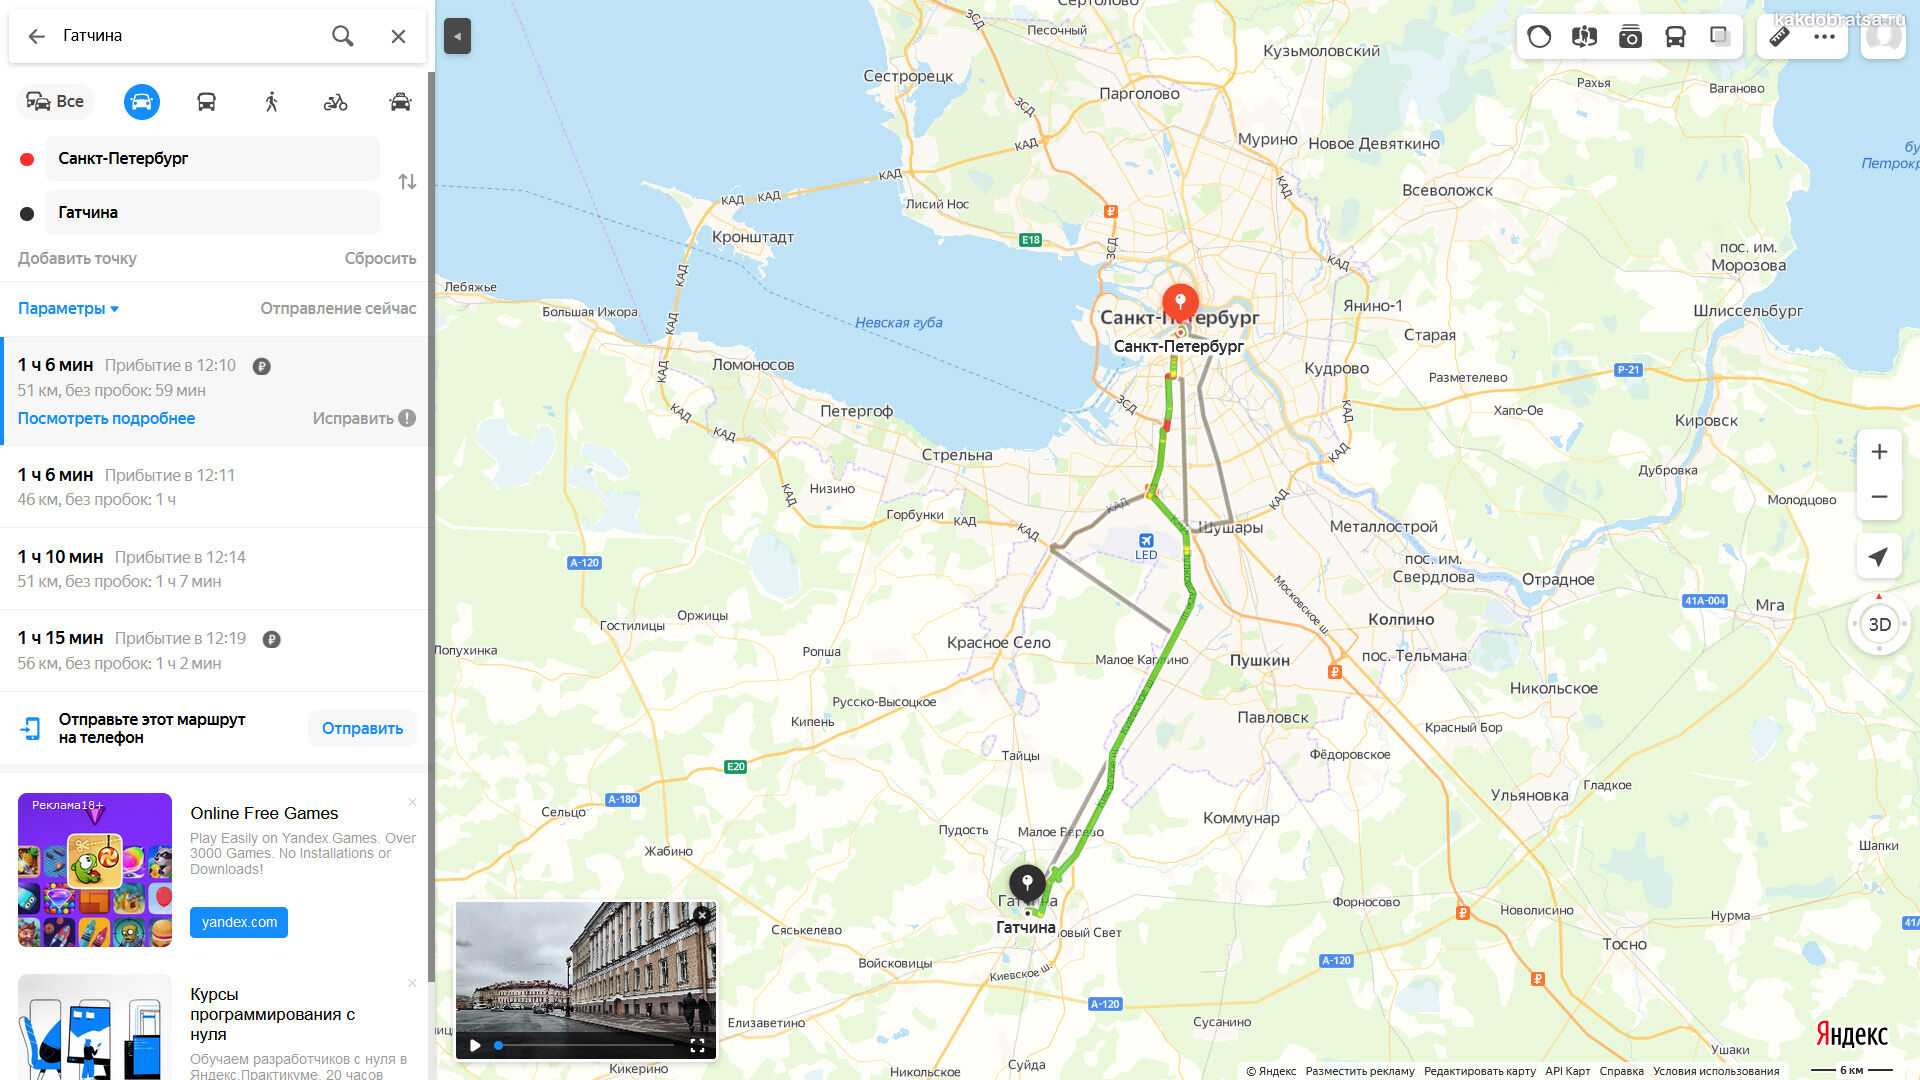 From Saint Petersburg to Gatchina Map